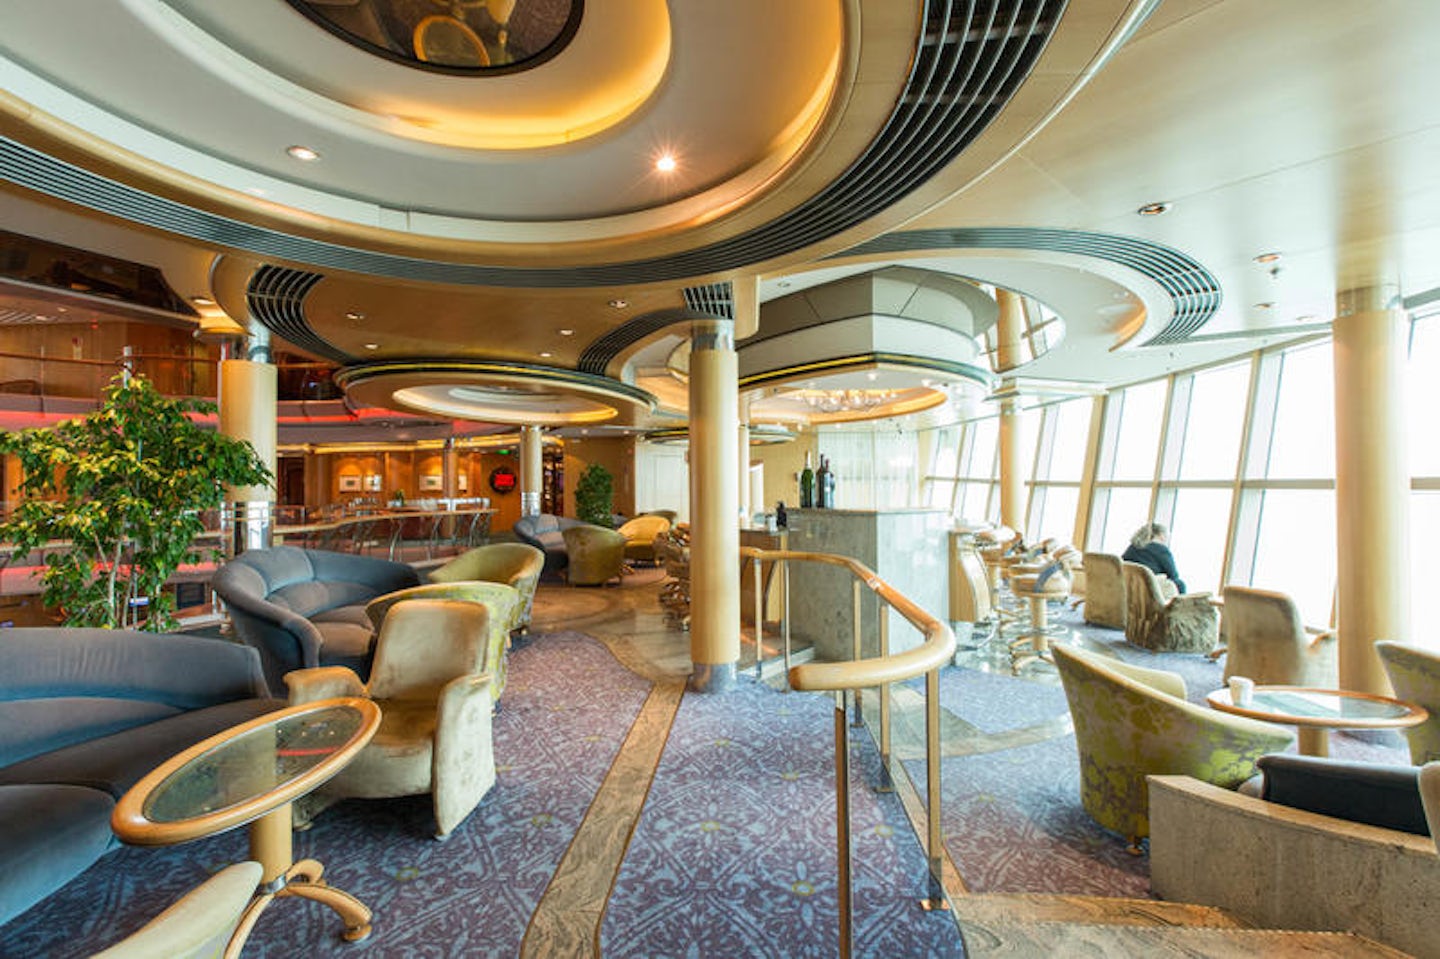 Champagne Bar on Radiance of the Seas